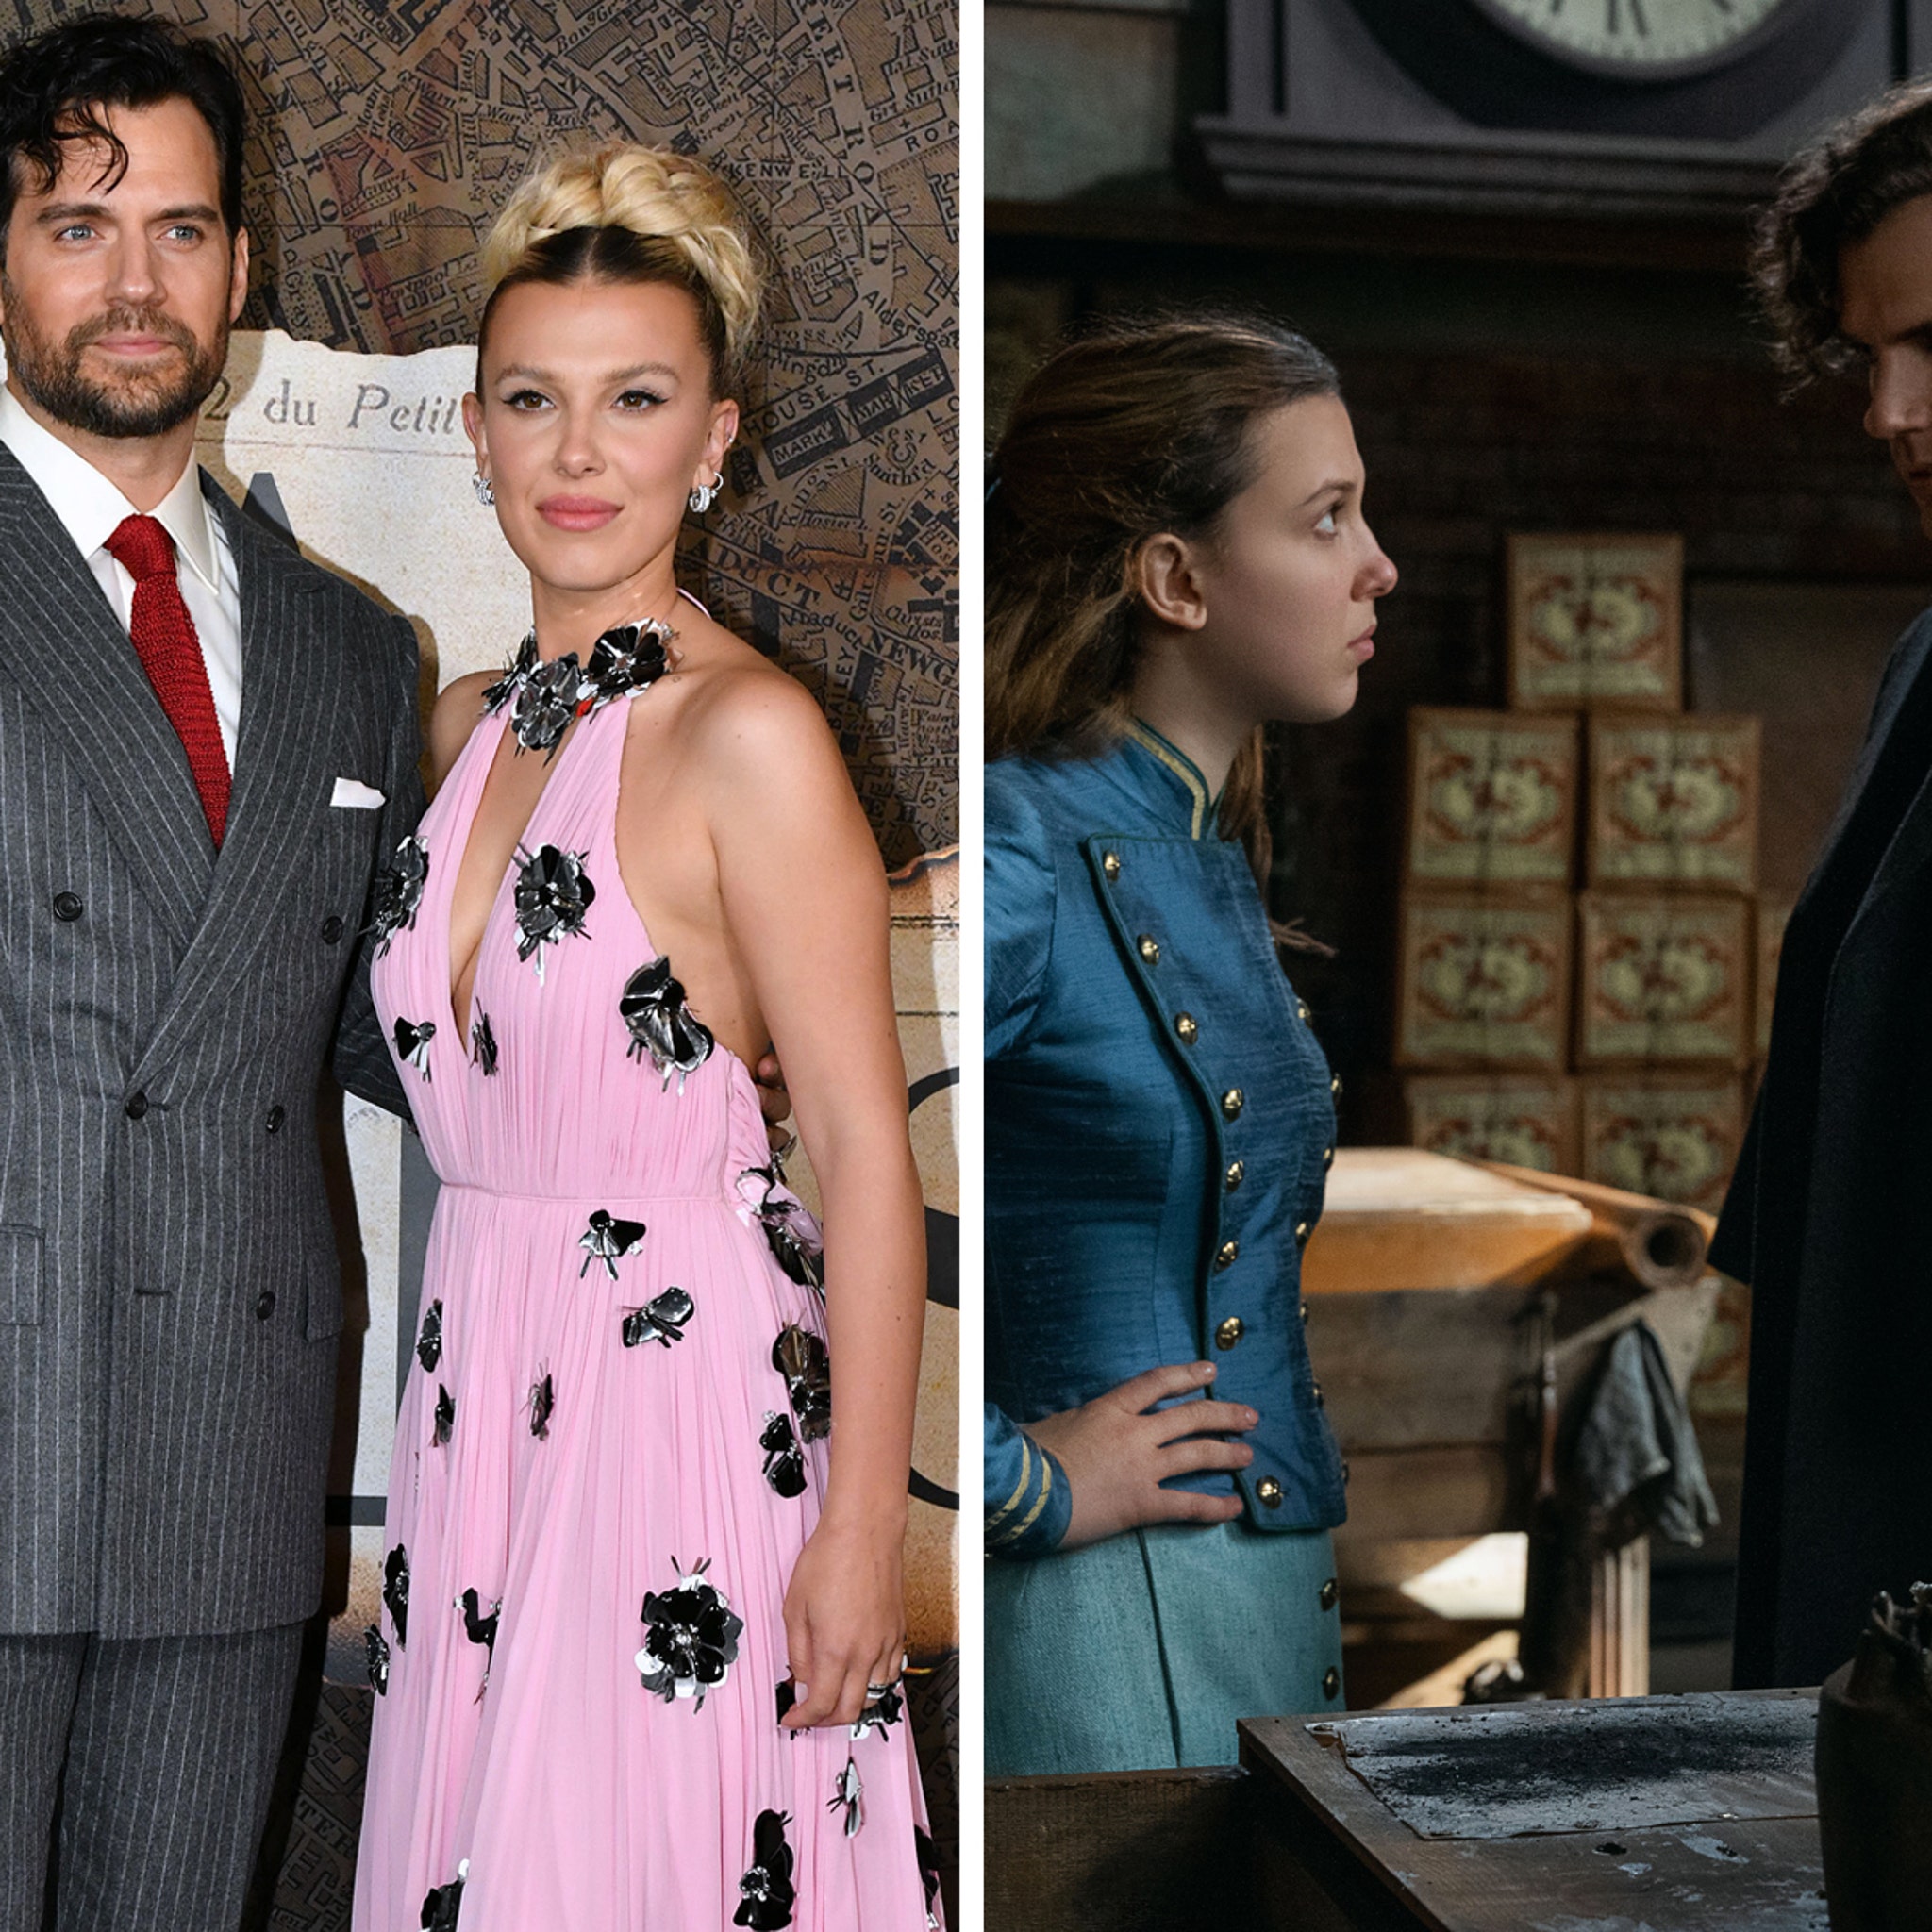 Enola Holmes 2: Millie Bobby Brown and Henry Cavill Are Back in